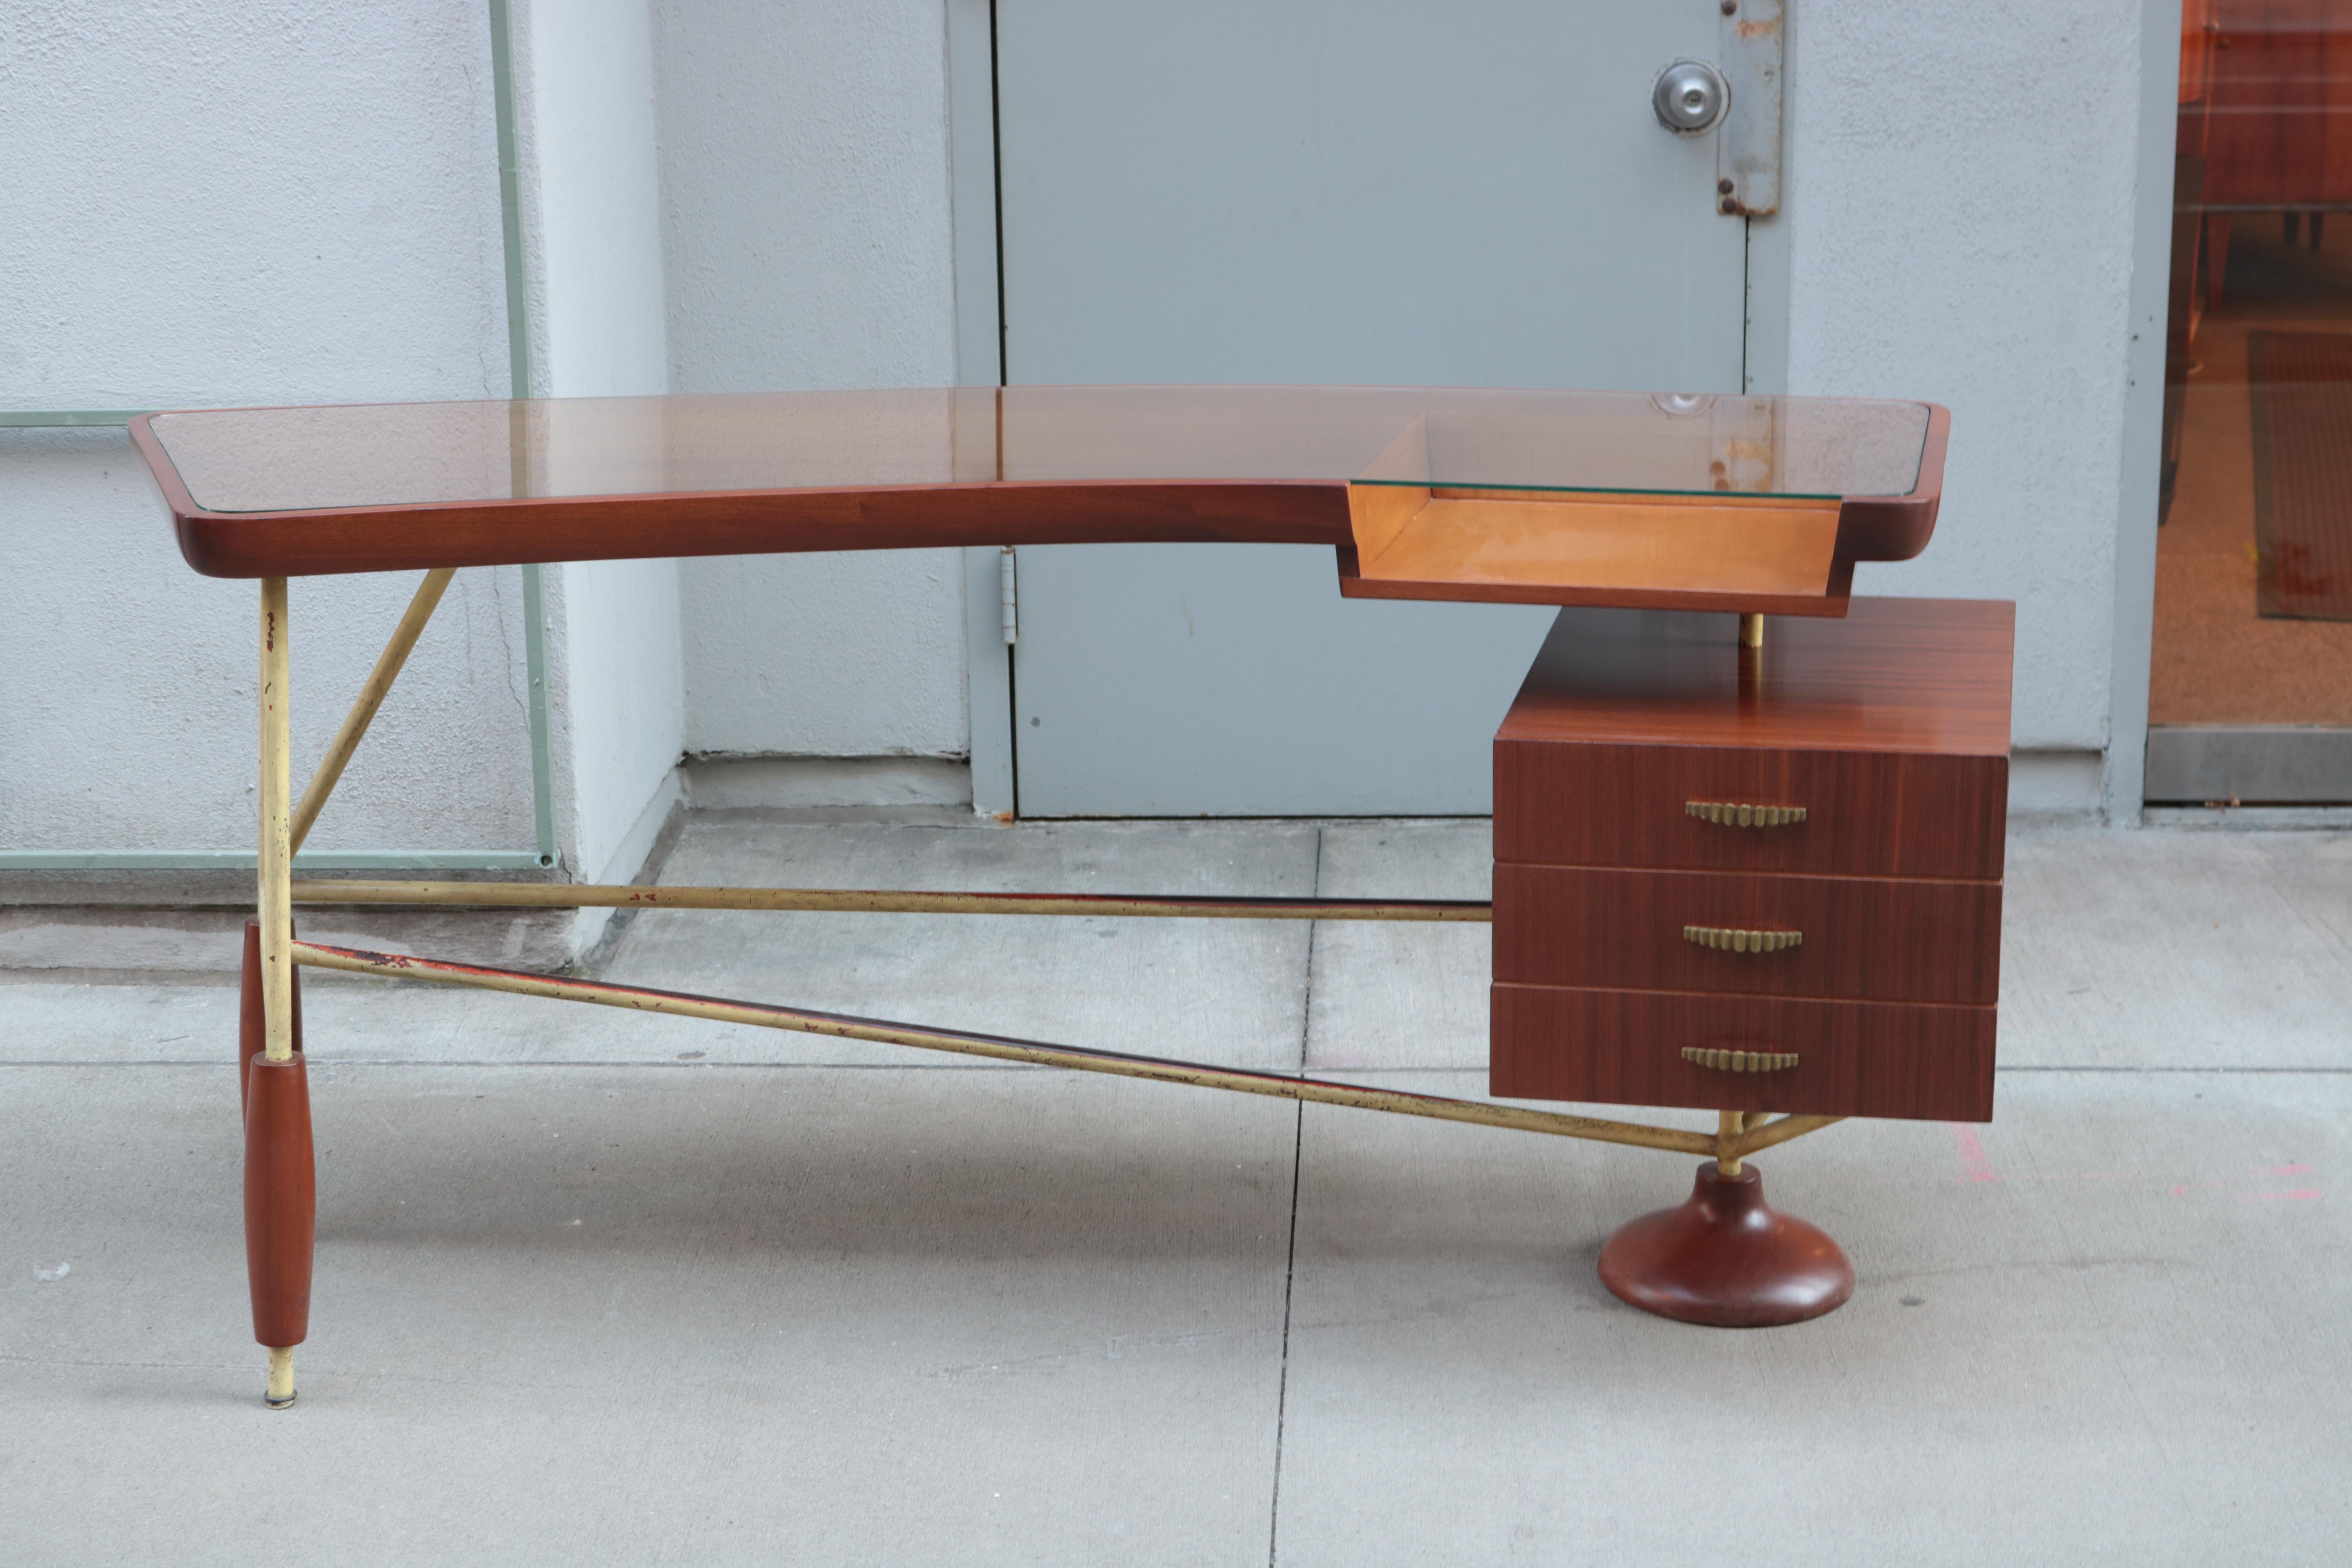 Sculptural Italian modernist desk.
Mahogany with painted steel stretchers featuring aged patina,
glass top with sycamore lined cut out.
For additional charge stretchers can be refinished, plated or painted.